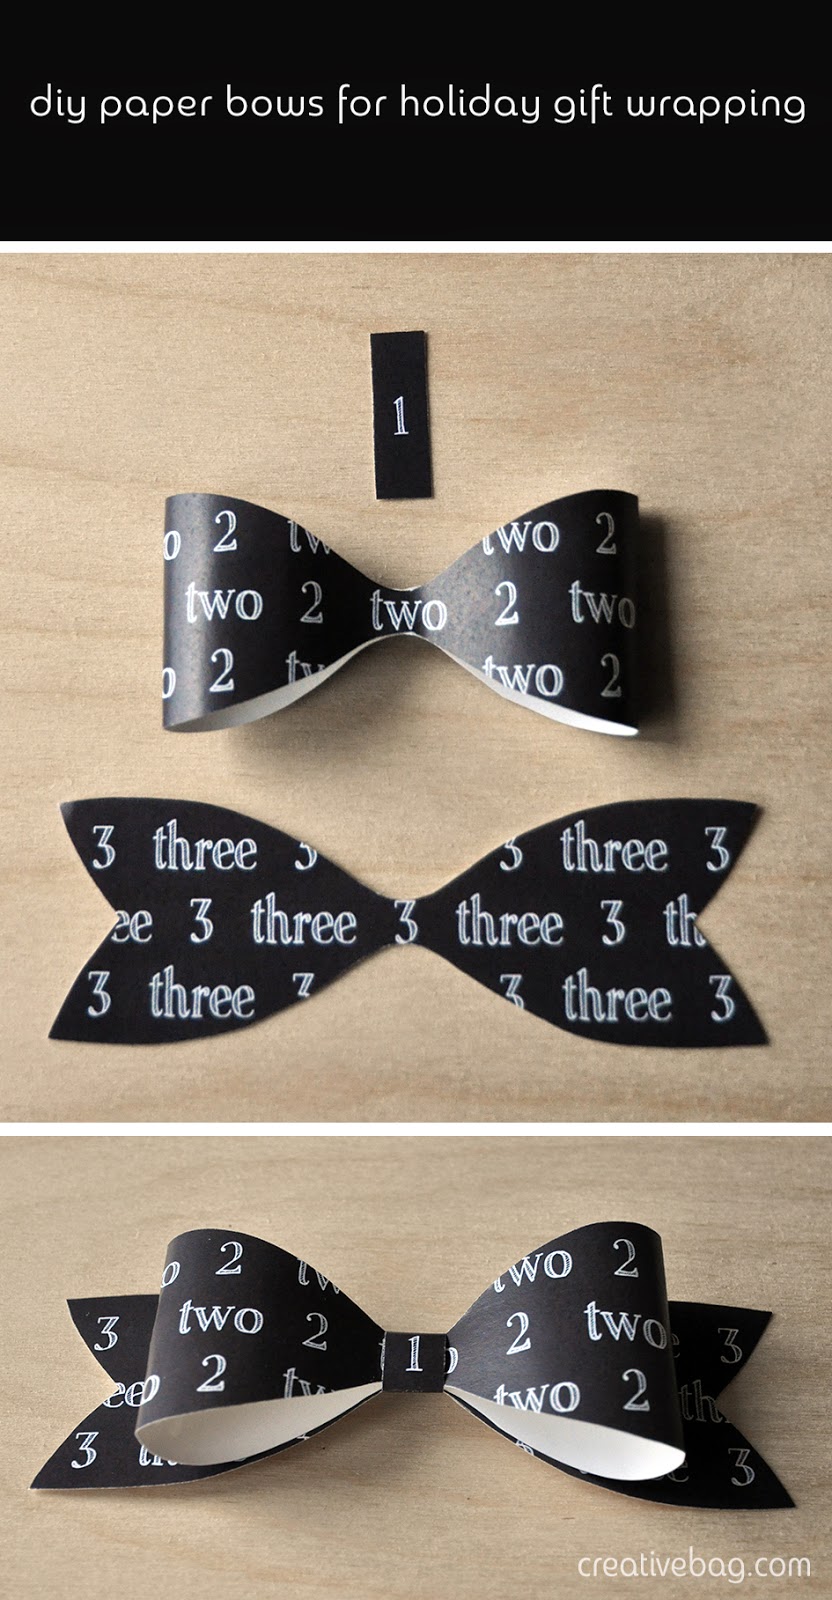 quick tutorial for creating paper bows - find lots of free downloads for paper bows on the blog | creativebag.com